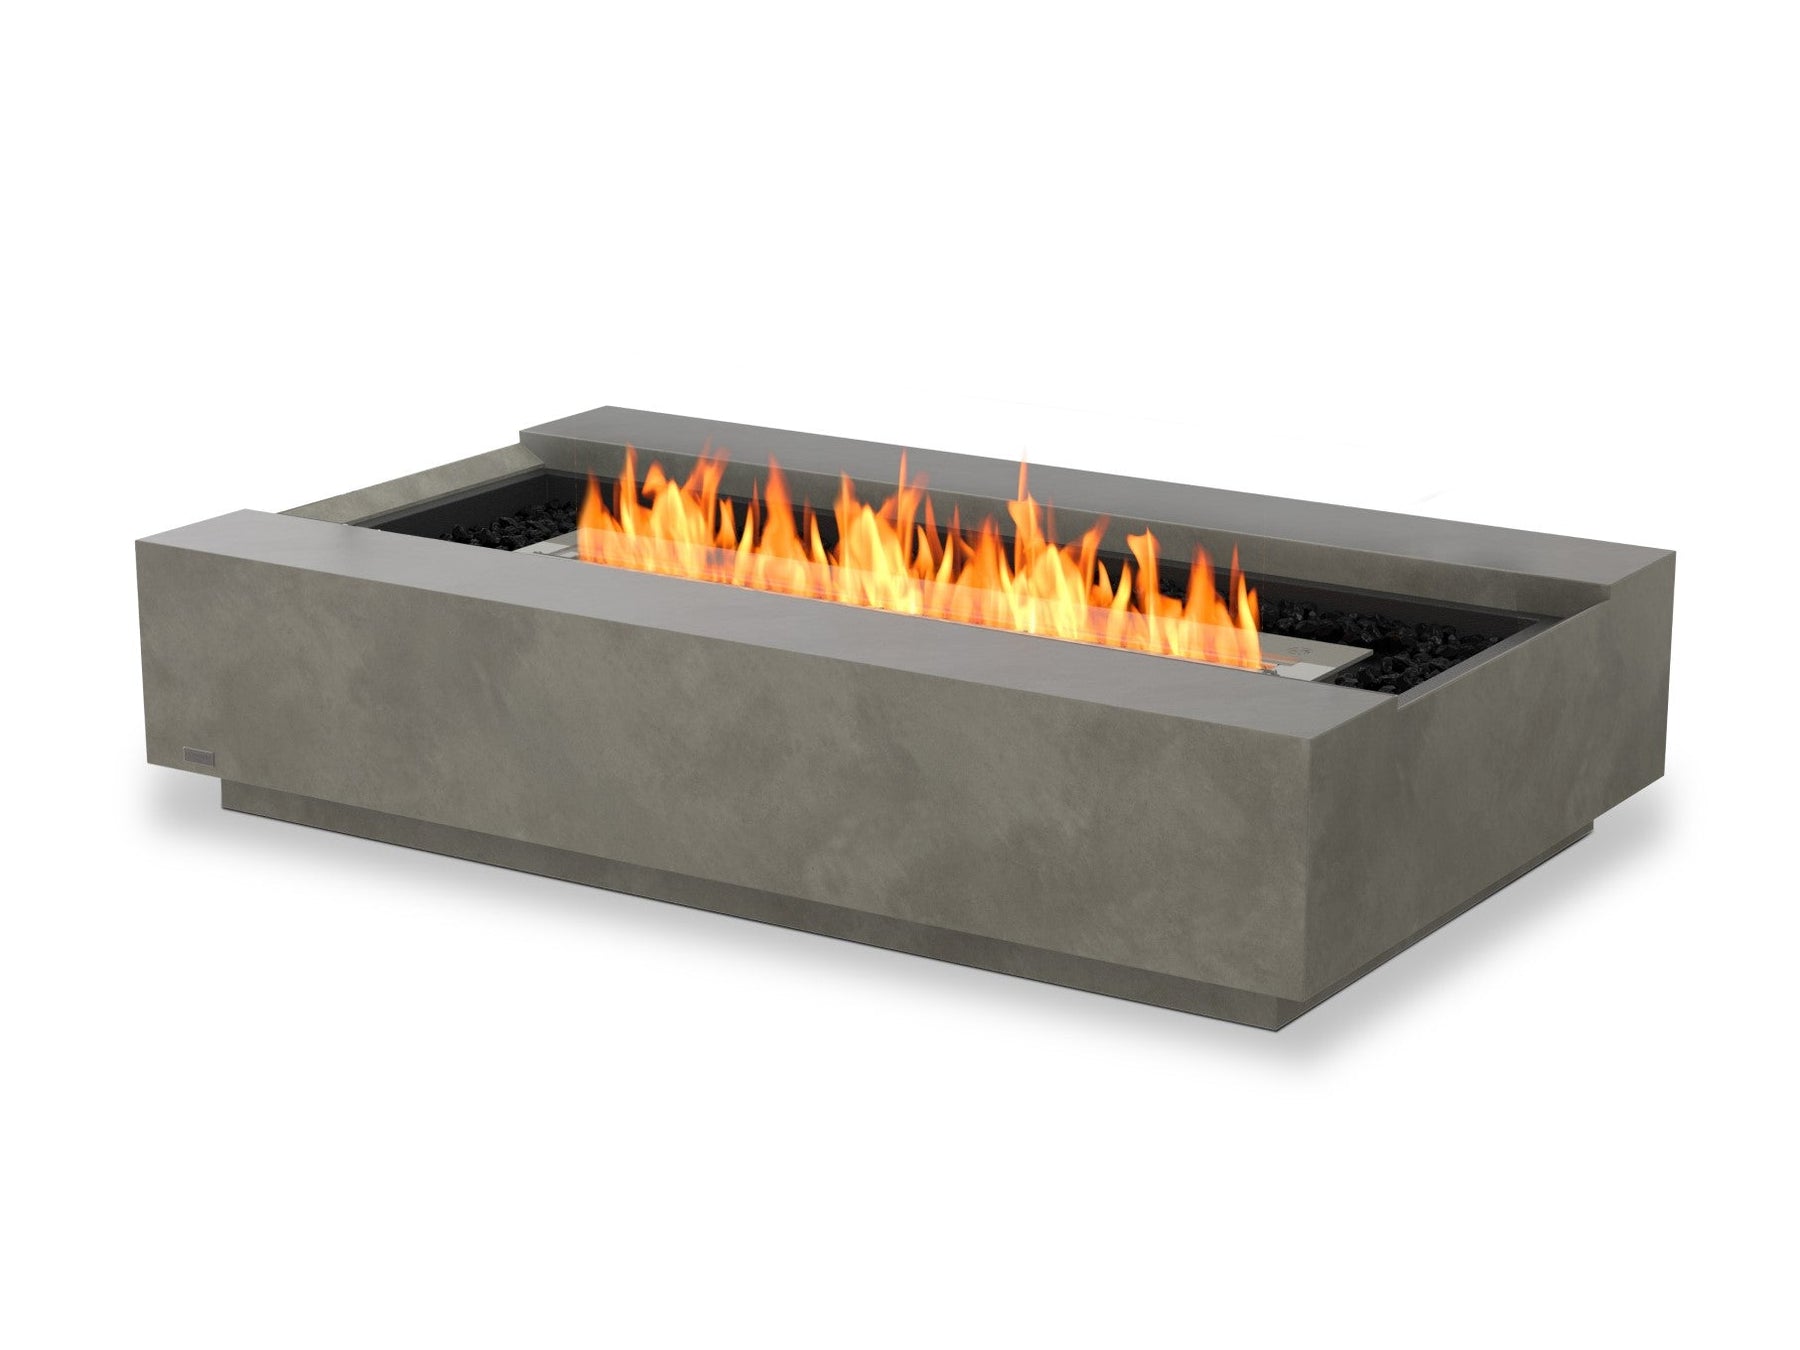 Alexander Francis Fire Pit Natural EcoSmart Cosmo 50 Fire Pit Table